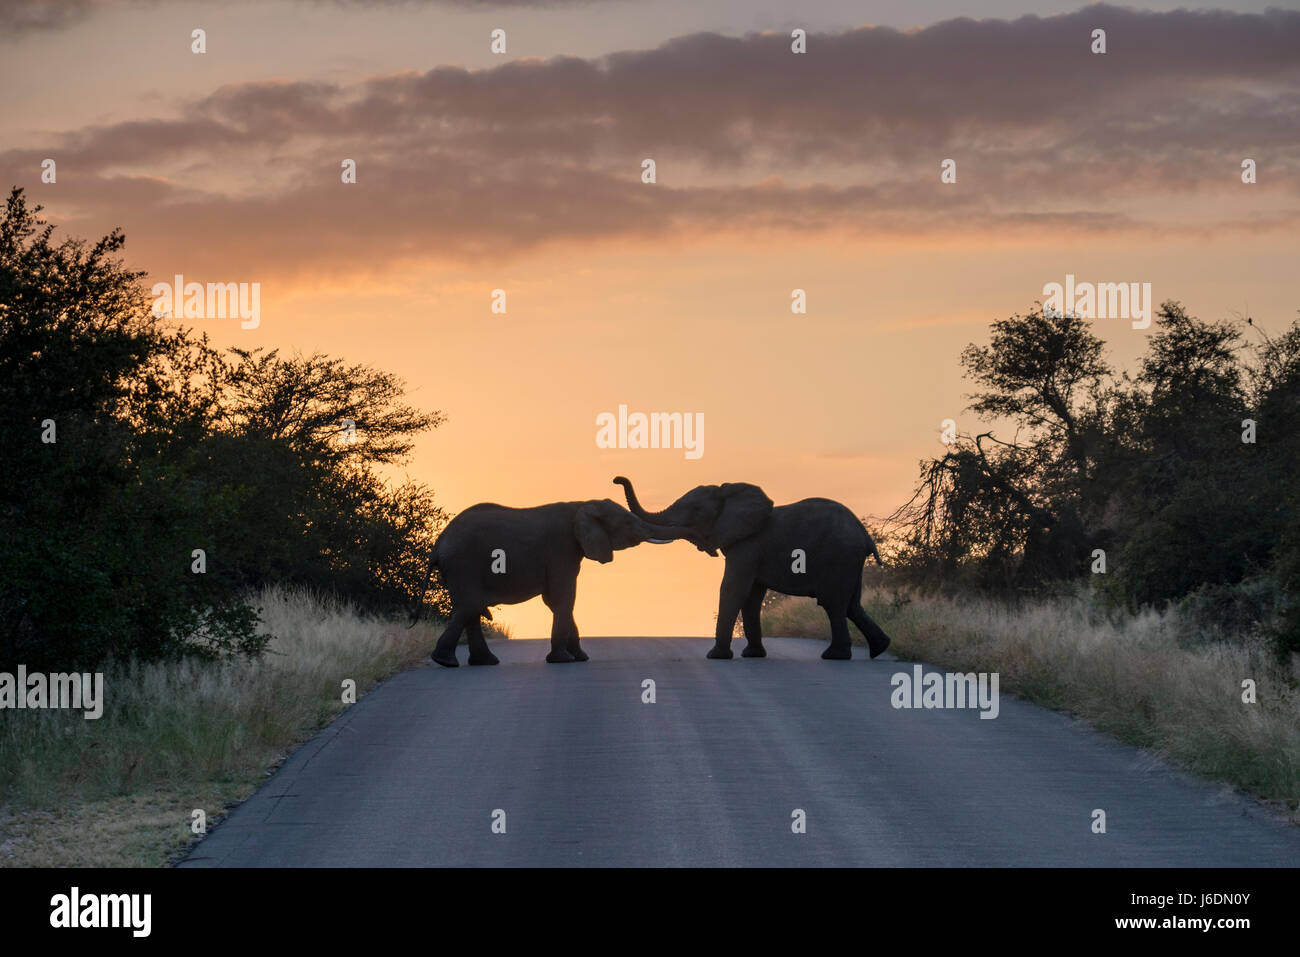 Two elephants from a large herd pausing on the road during sunrise in Kruger National Park, South Africa Stock Photo